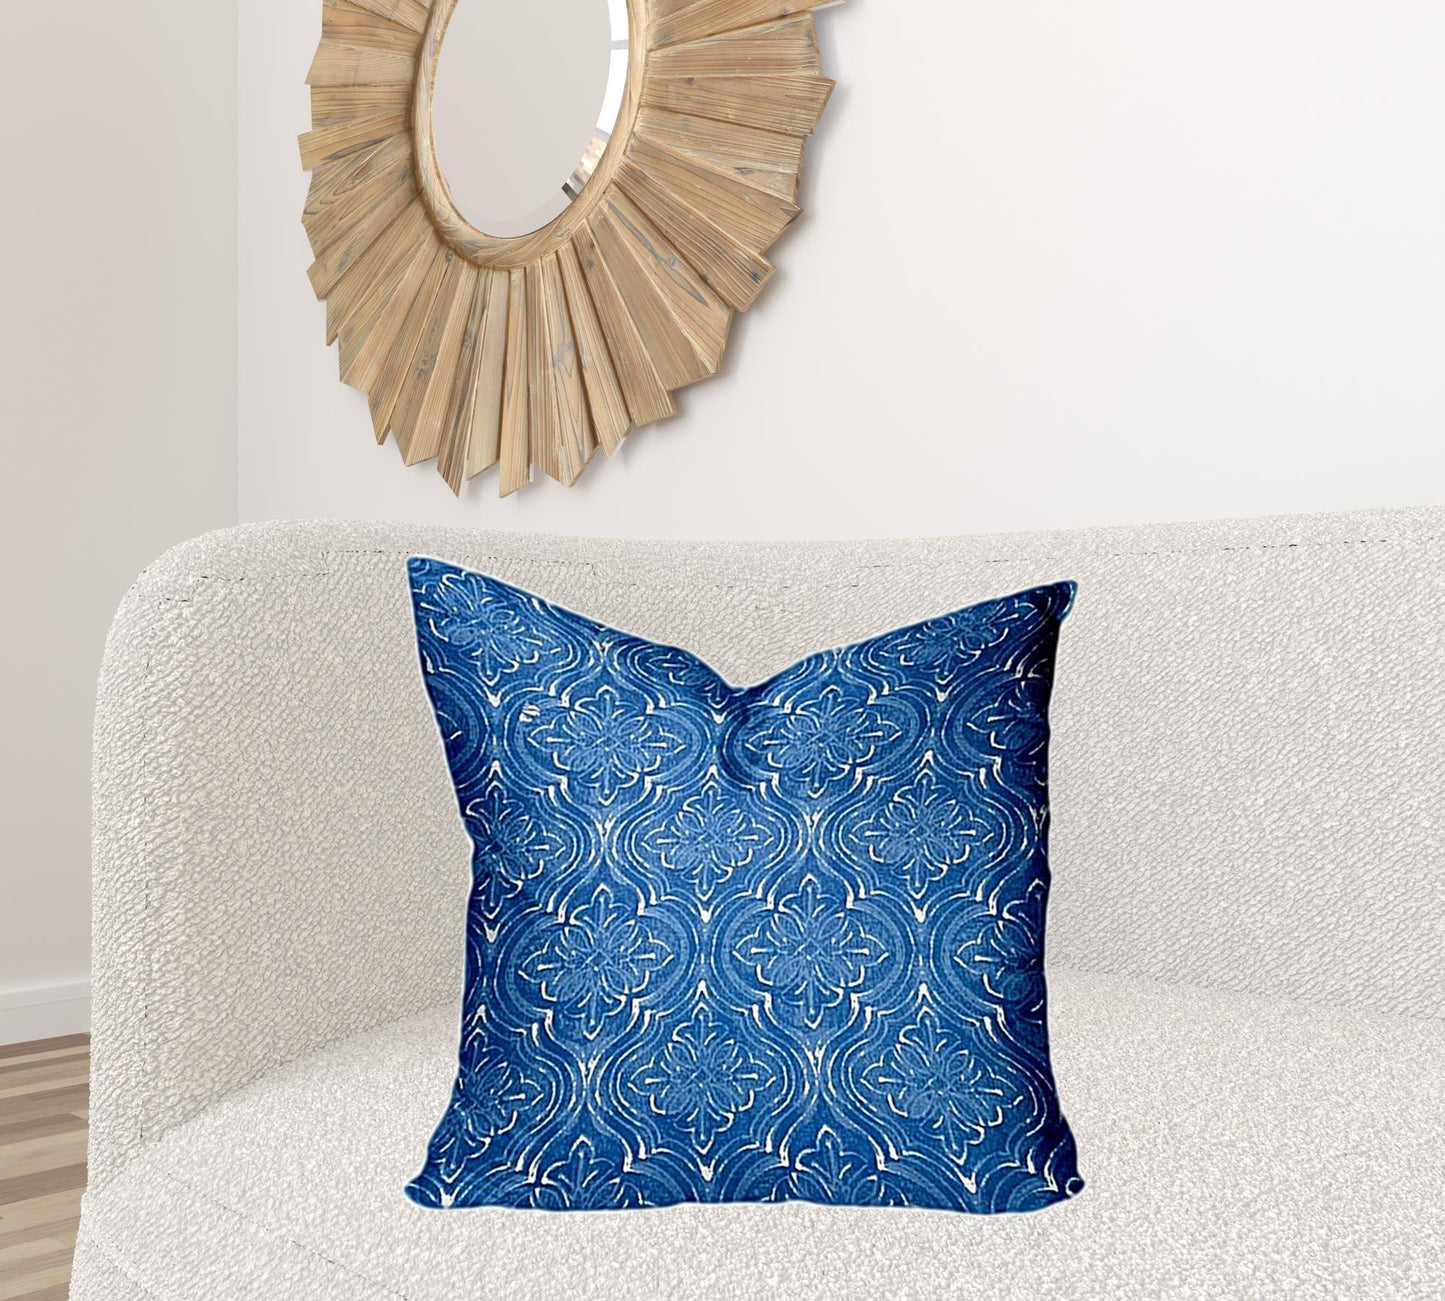 24" X 24" Blue And White Zippered Ikat Throw Indoor Outdoor Pillow Cover